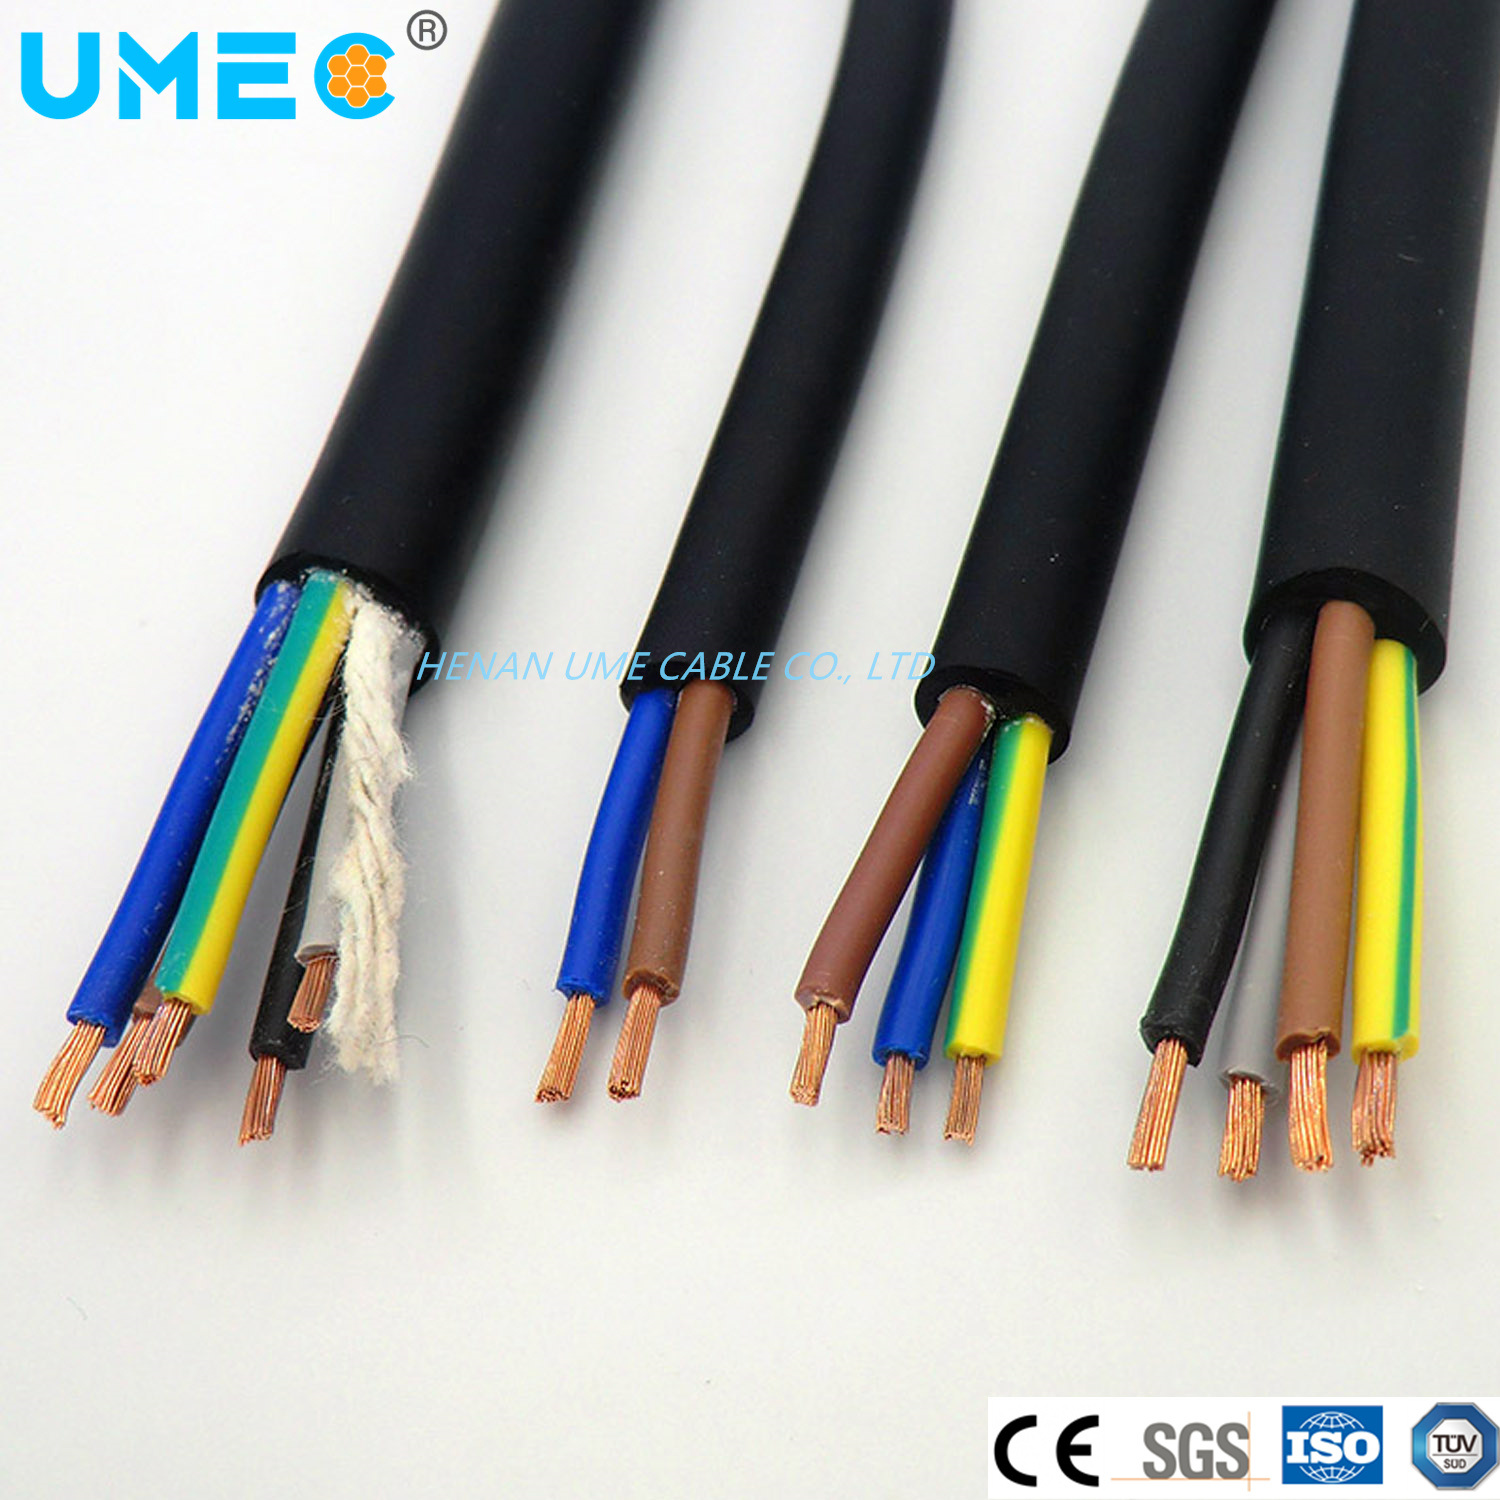 Elastomer Compound Sheath Cable H05bb-F H07bb-F Stranded or Tinned Electric Cable Wire